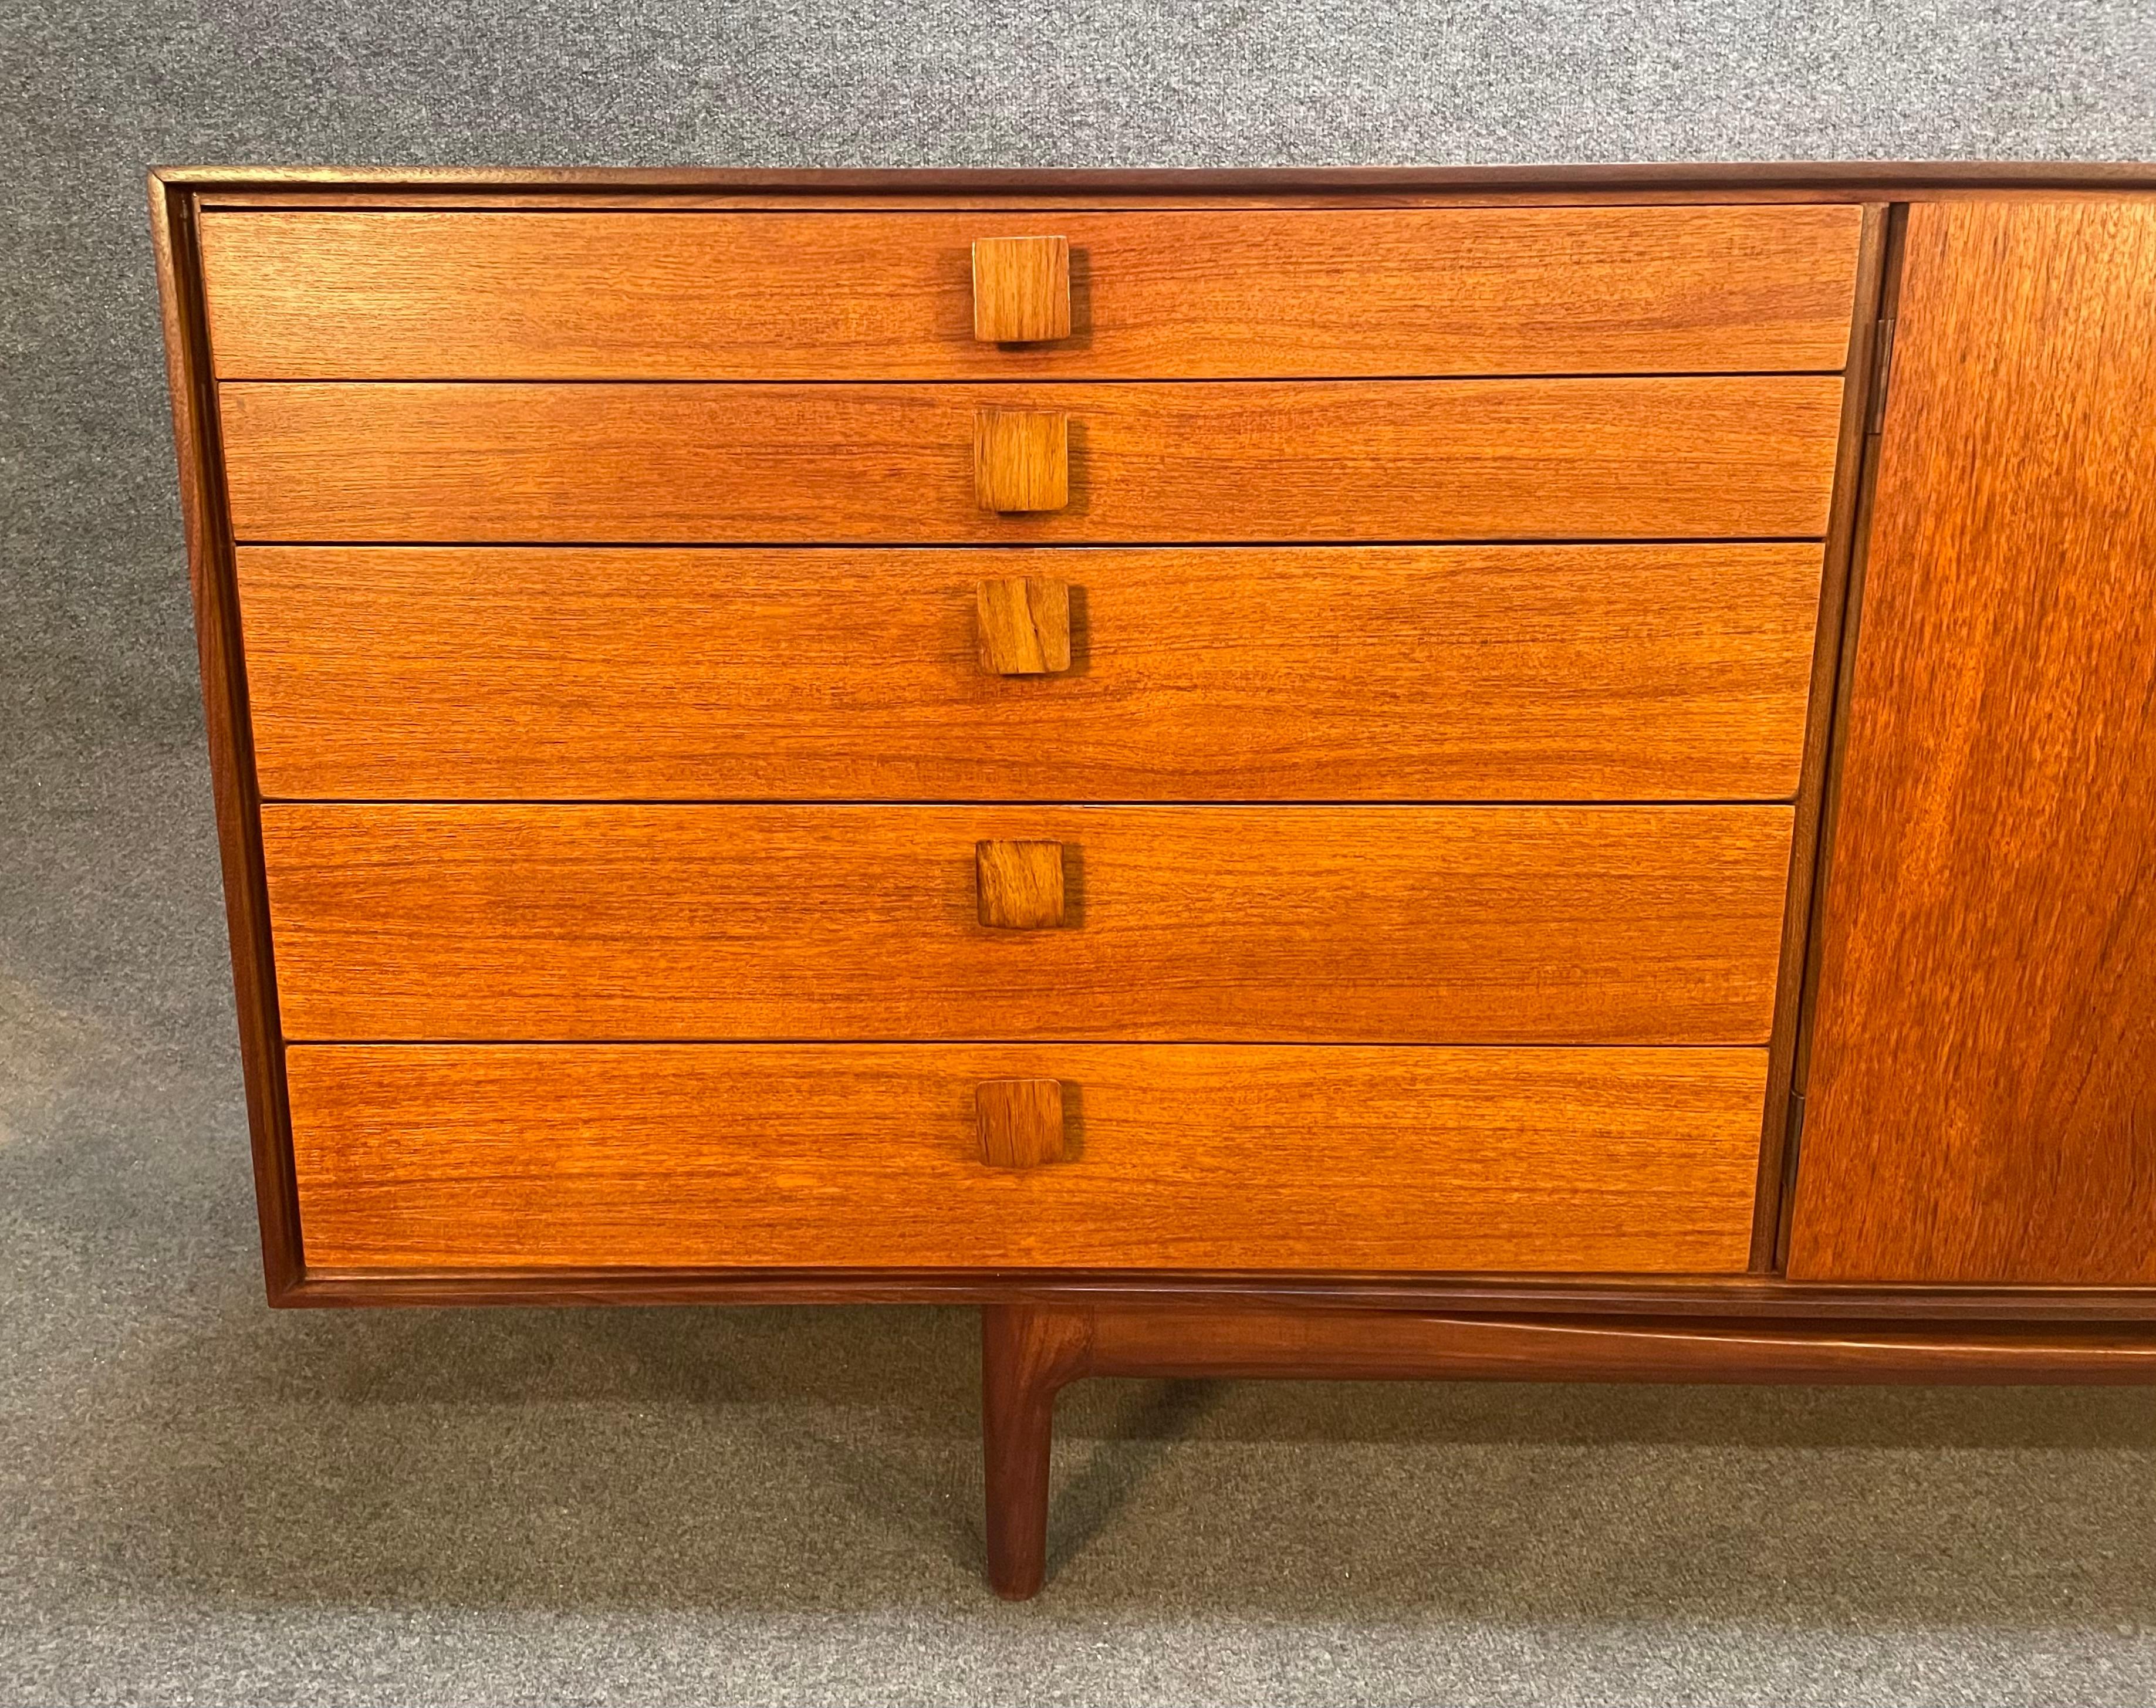 Here is a beautiful and rare British sideboard in teak designed by Ib Kofod Larsen and manufactured by G Plan in UK in the 1960's.
This lovely credenza, recently imported from the UK to California before its refinishing, features a vibrant wood